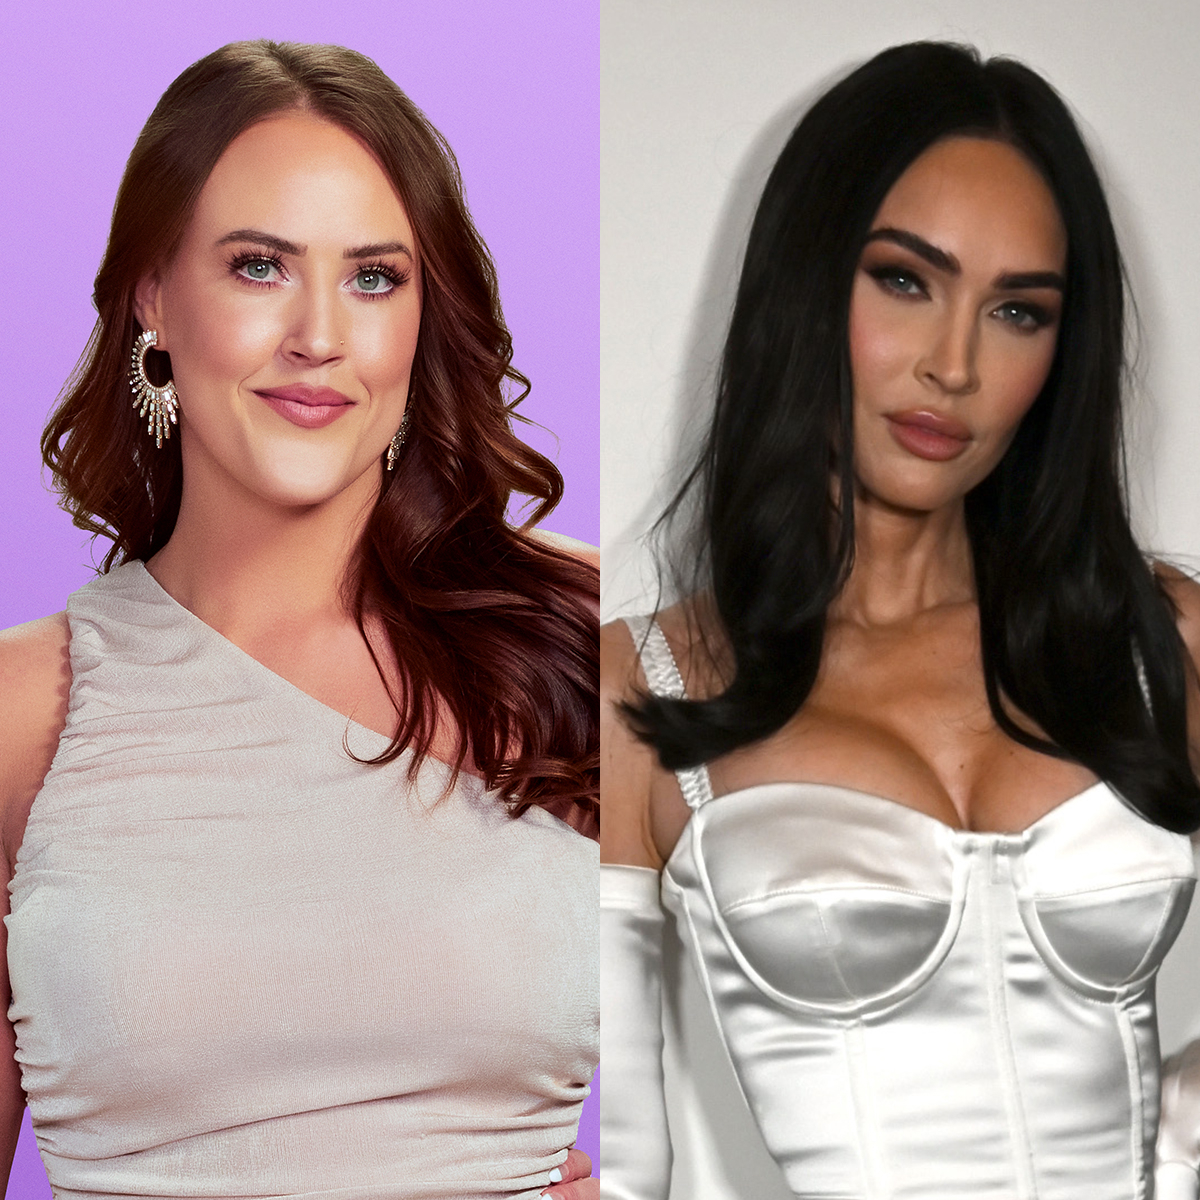 Love Is Blind’s Chelsea Responds to Getting “Dragged” Over Megan Fox Comparison